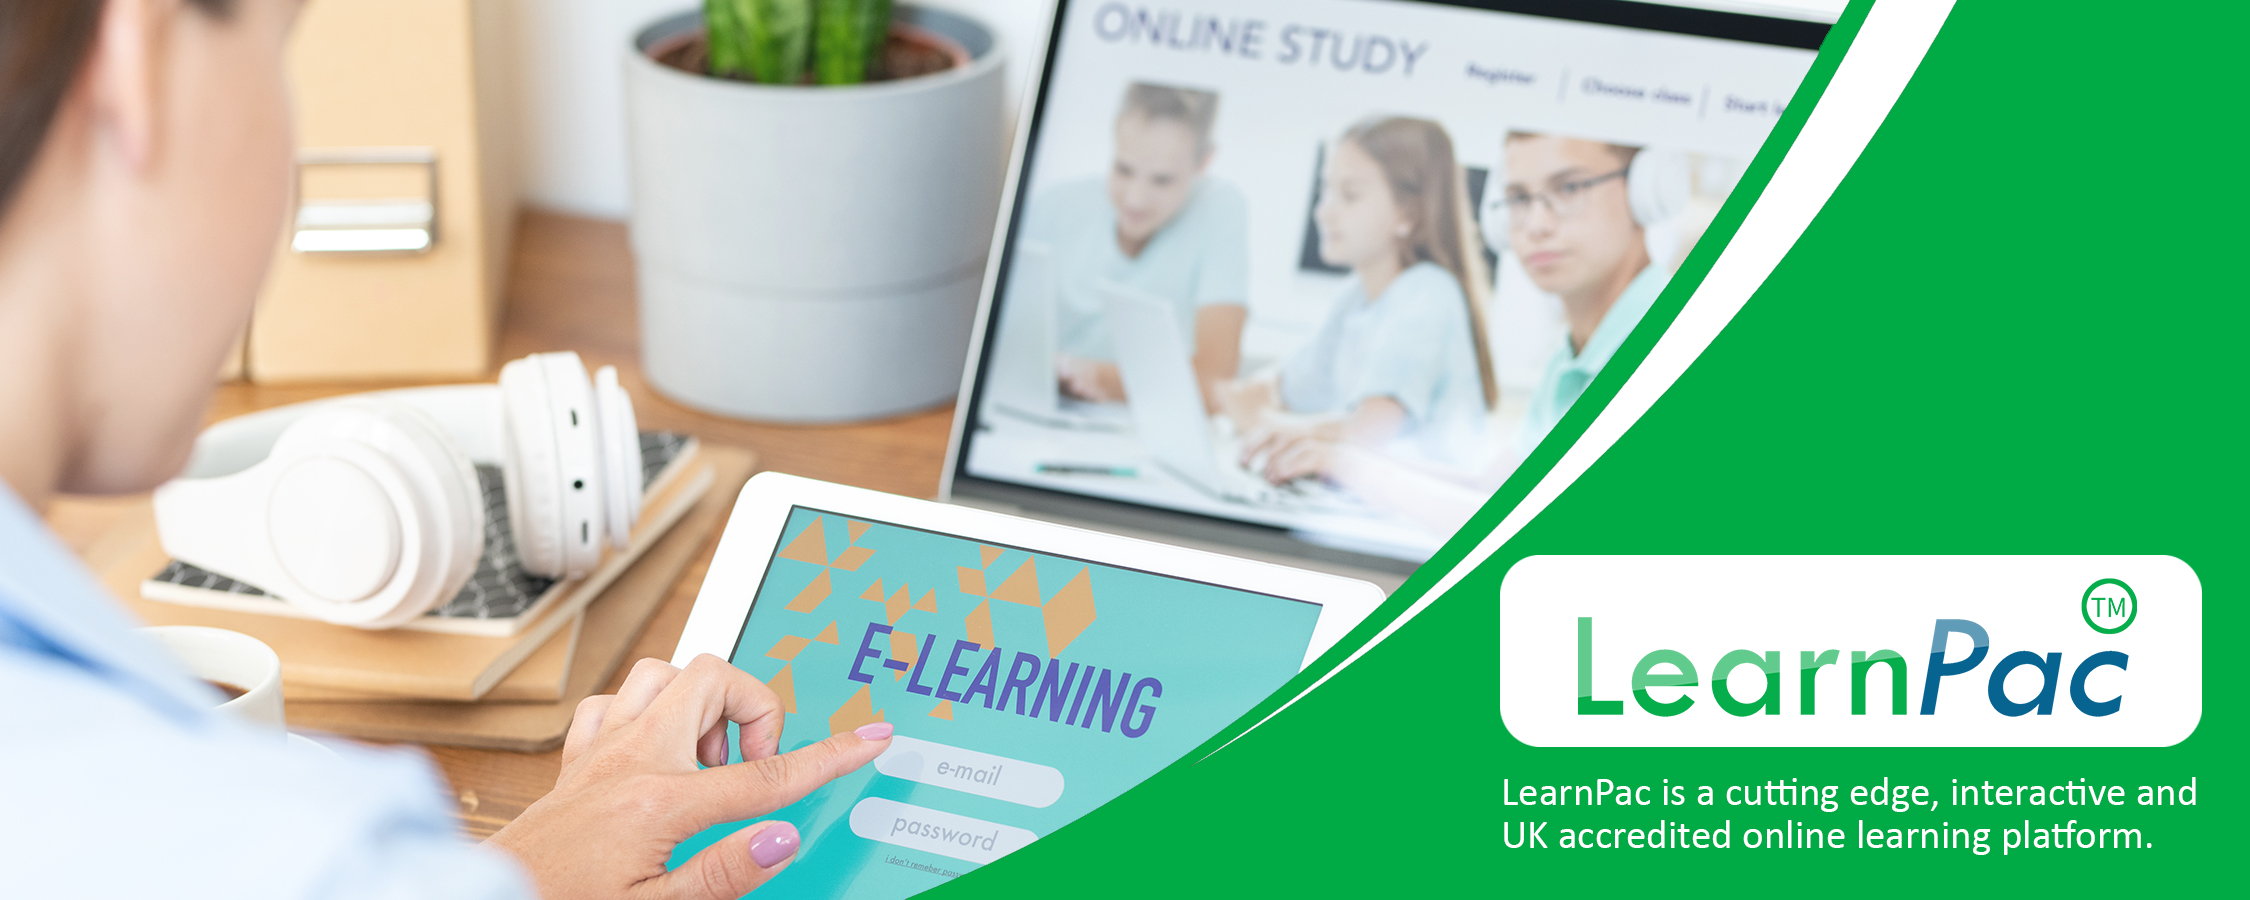 Duty of Care - Online Learning Courses - E-Learning Courses - LearnPac Systems UK -